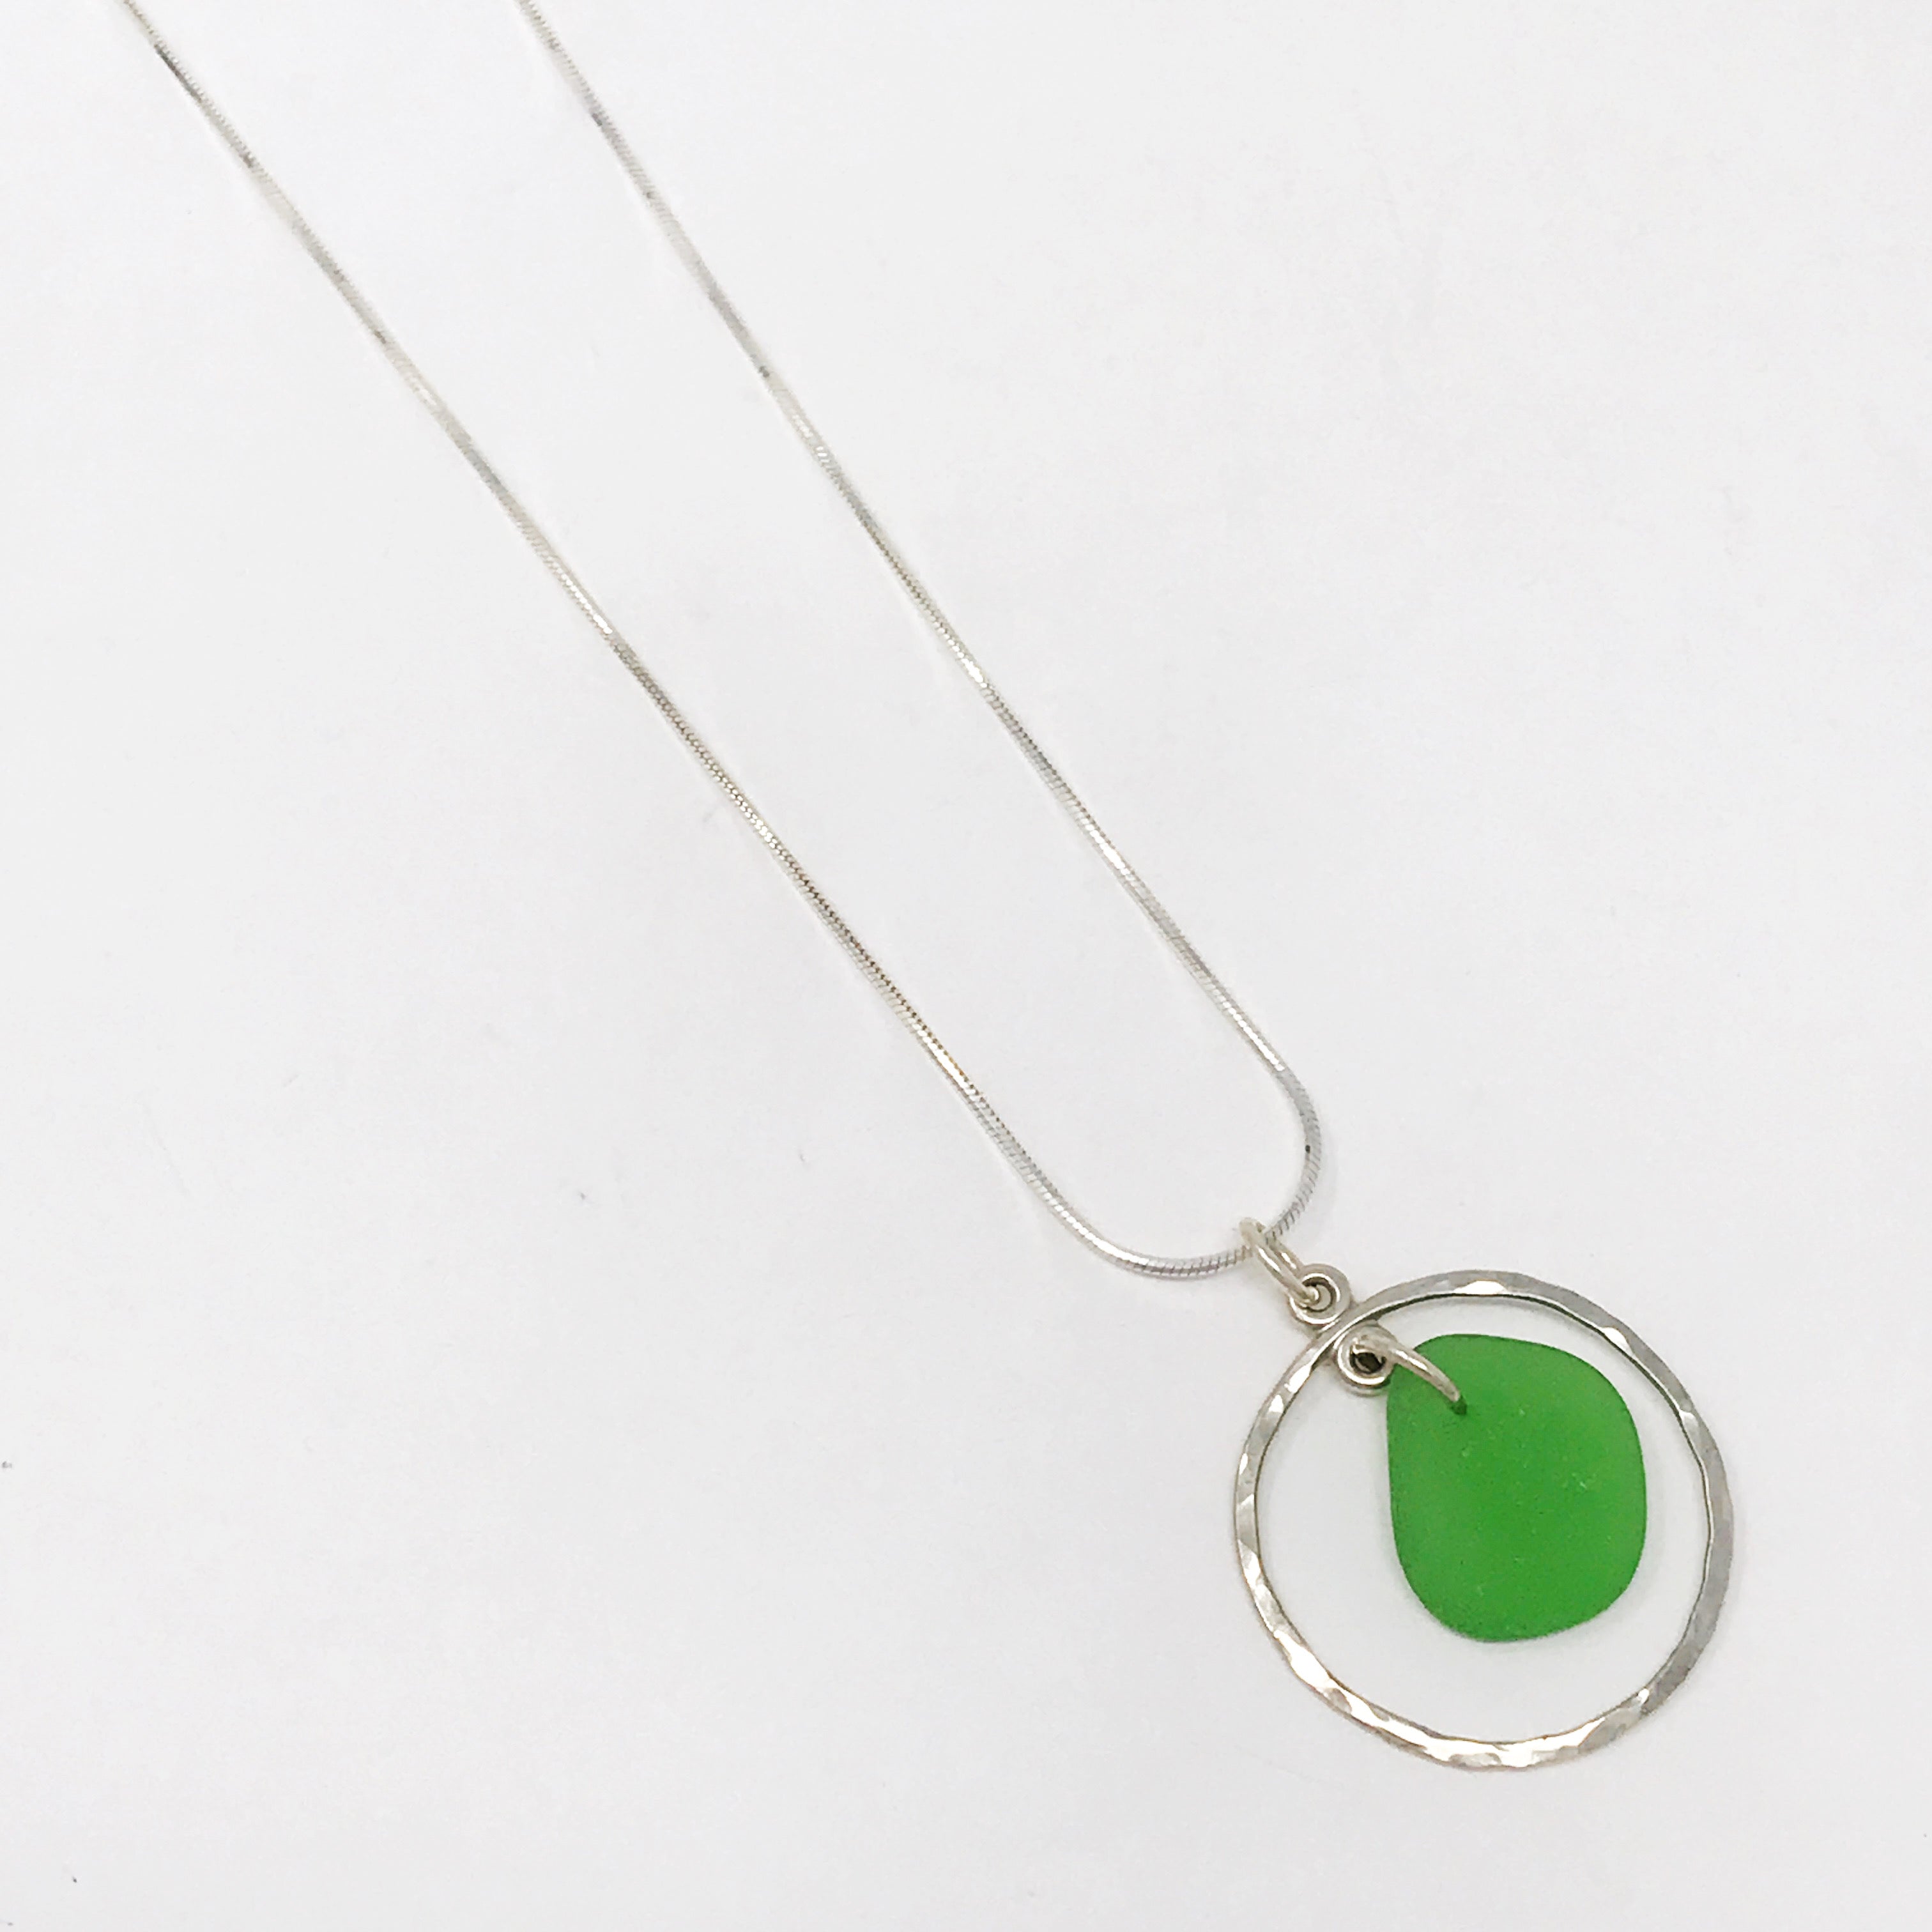 silver pendant glass necklace